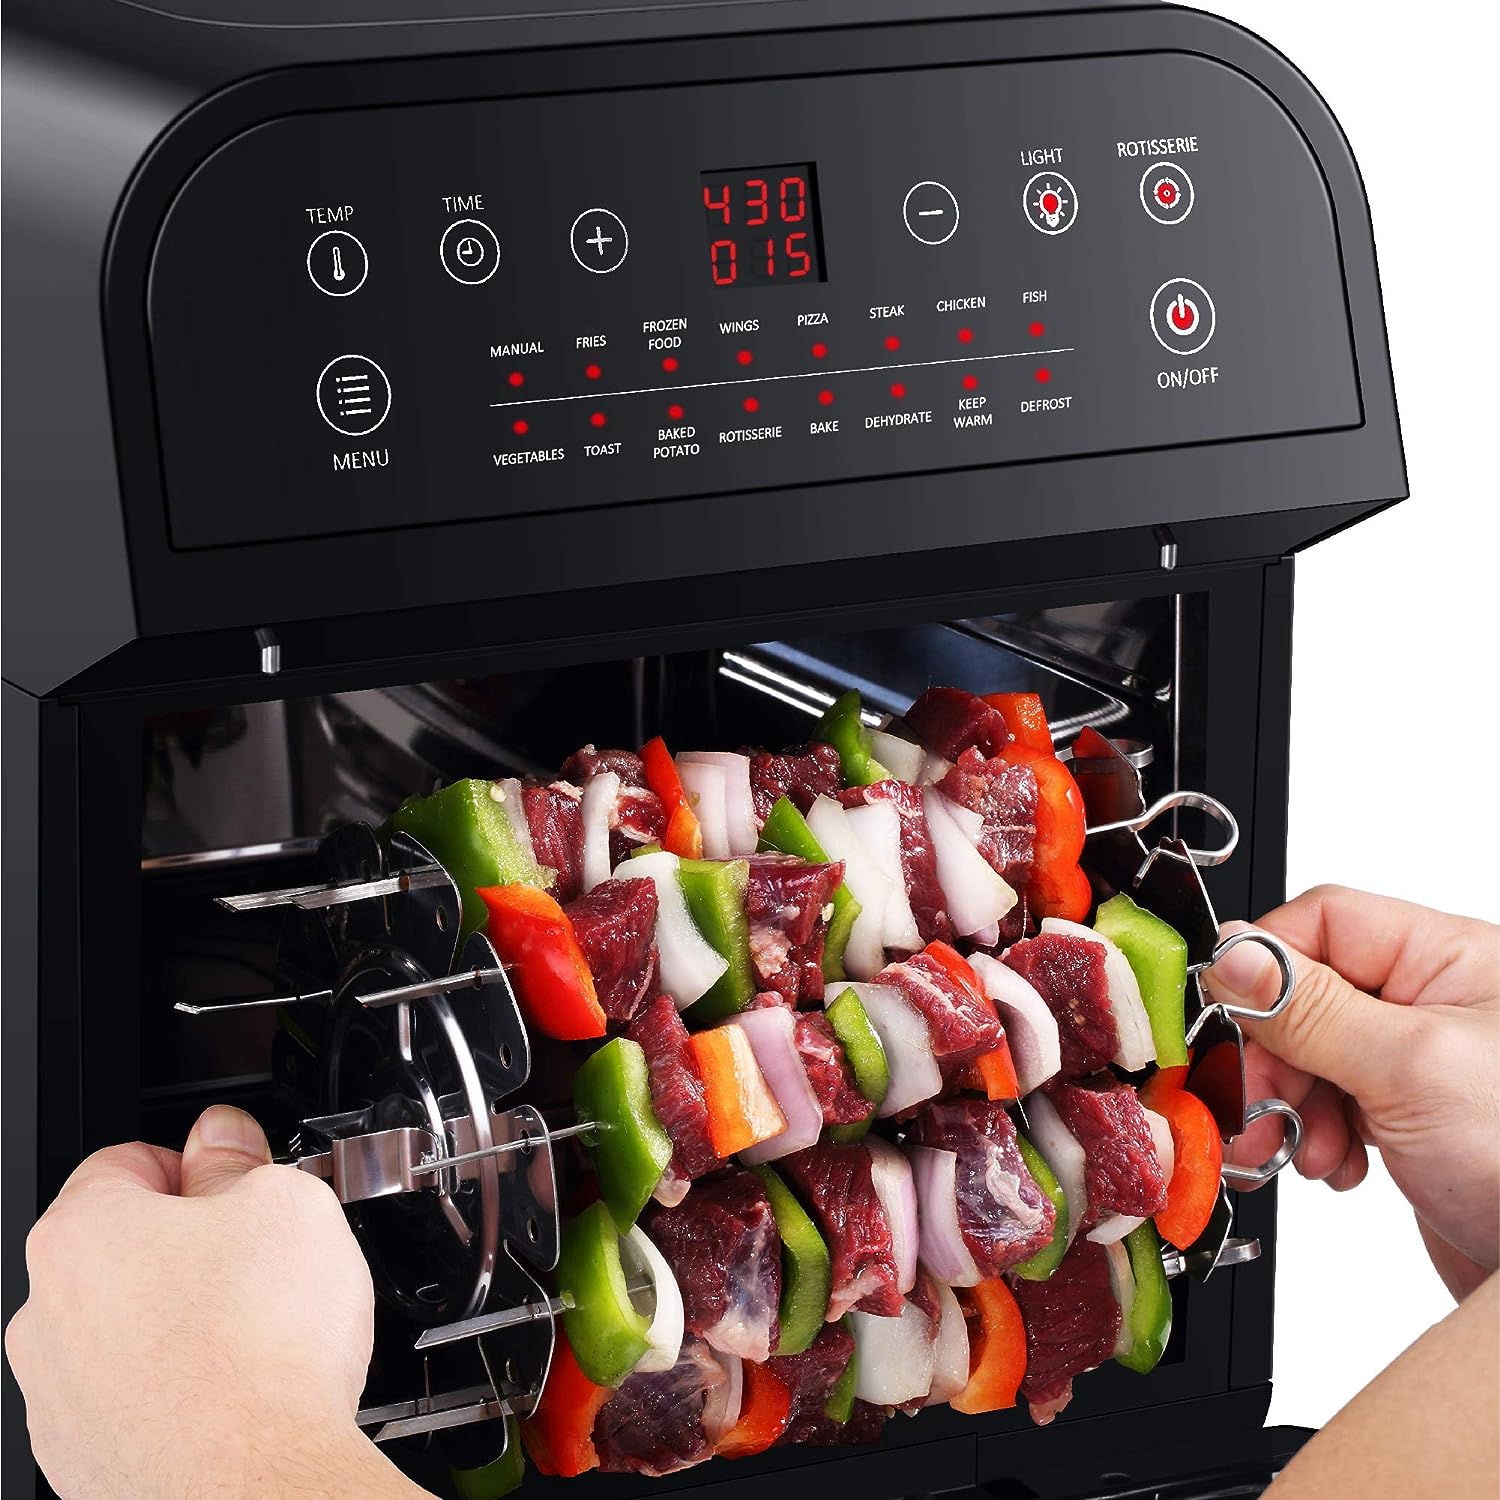 Discover the Best Air Fryers with Rotisserie on Amazon to find the perfect one for your cooking needs.